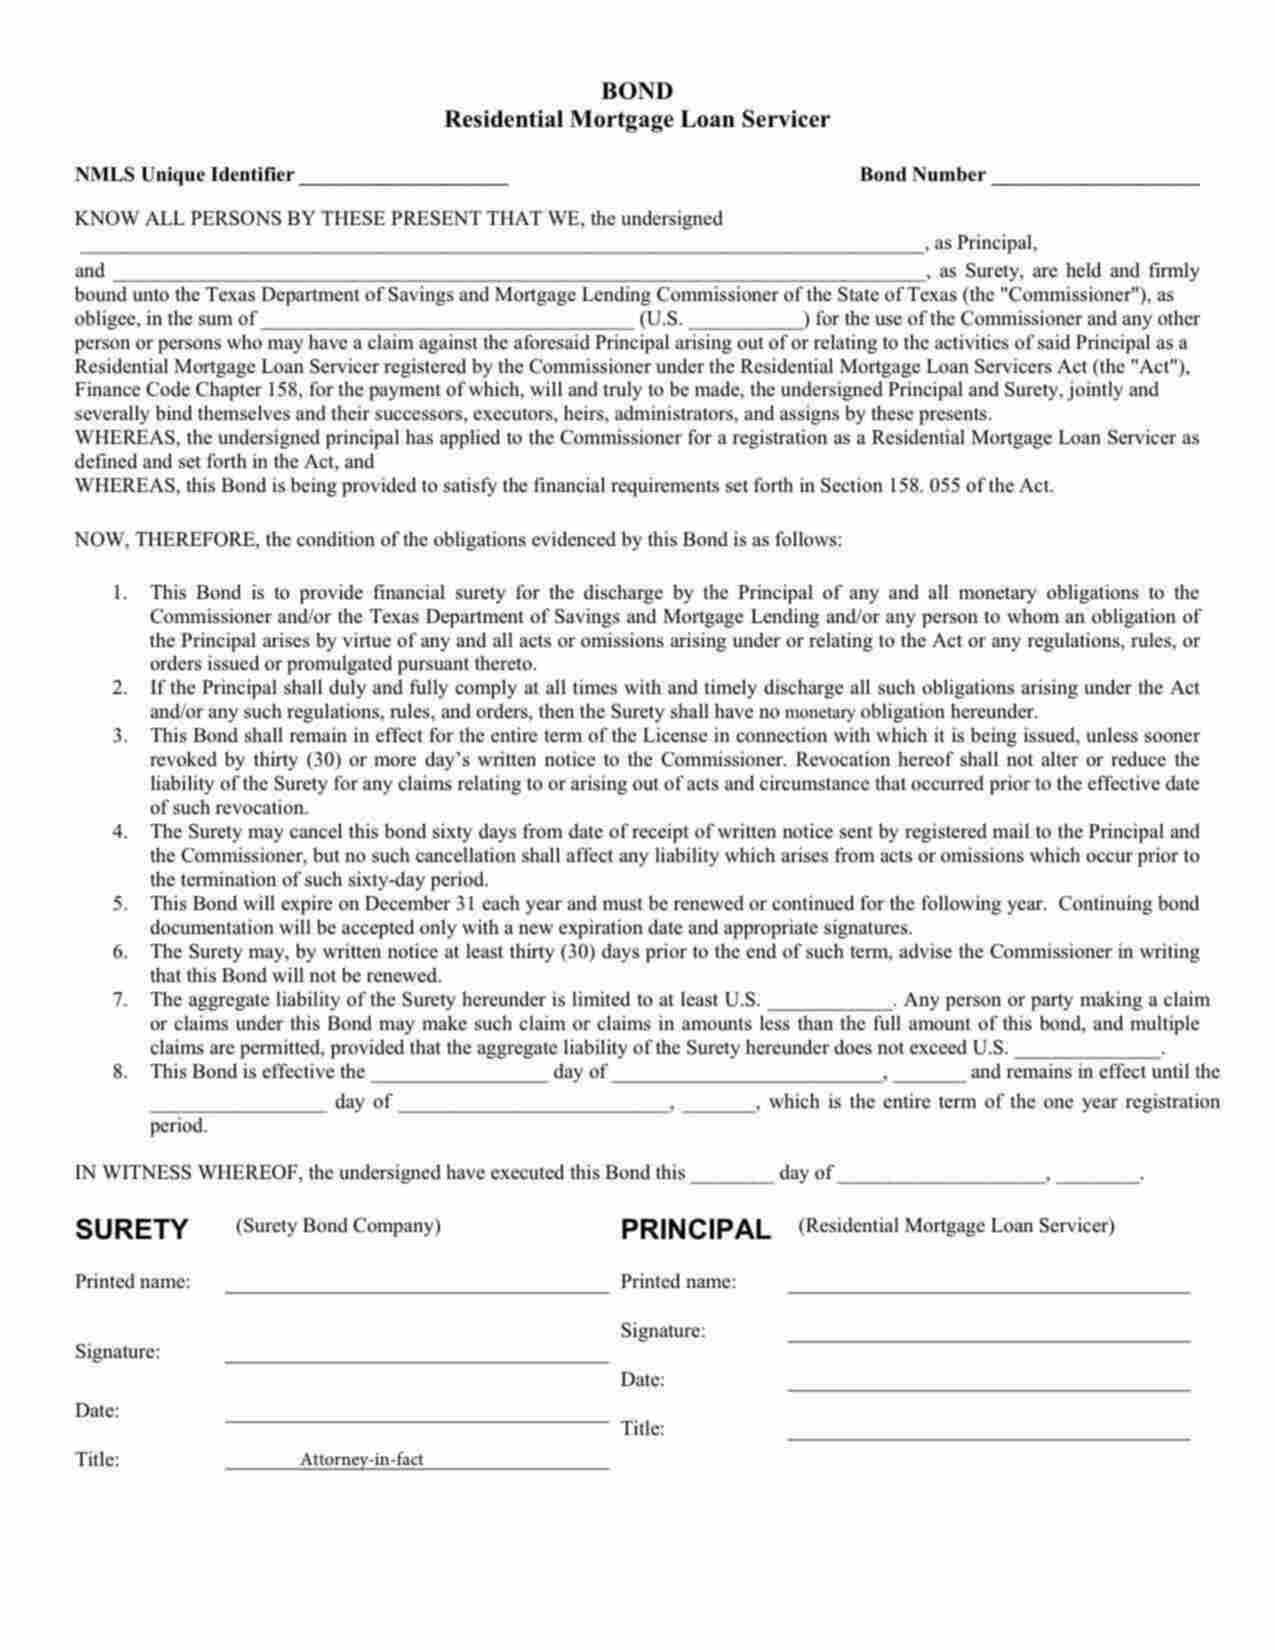 Texas Residential Mortgage Loan Servicer Bond Form